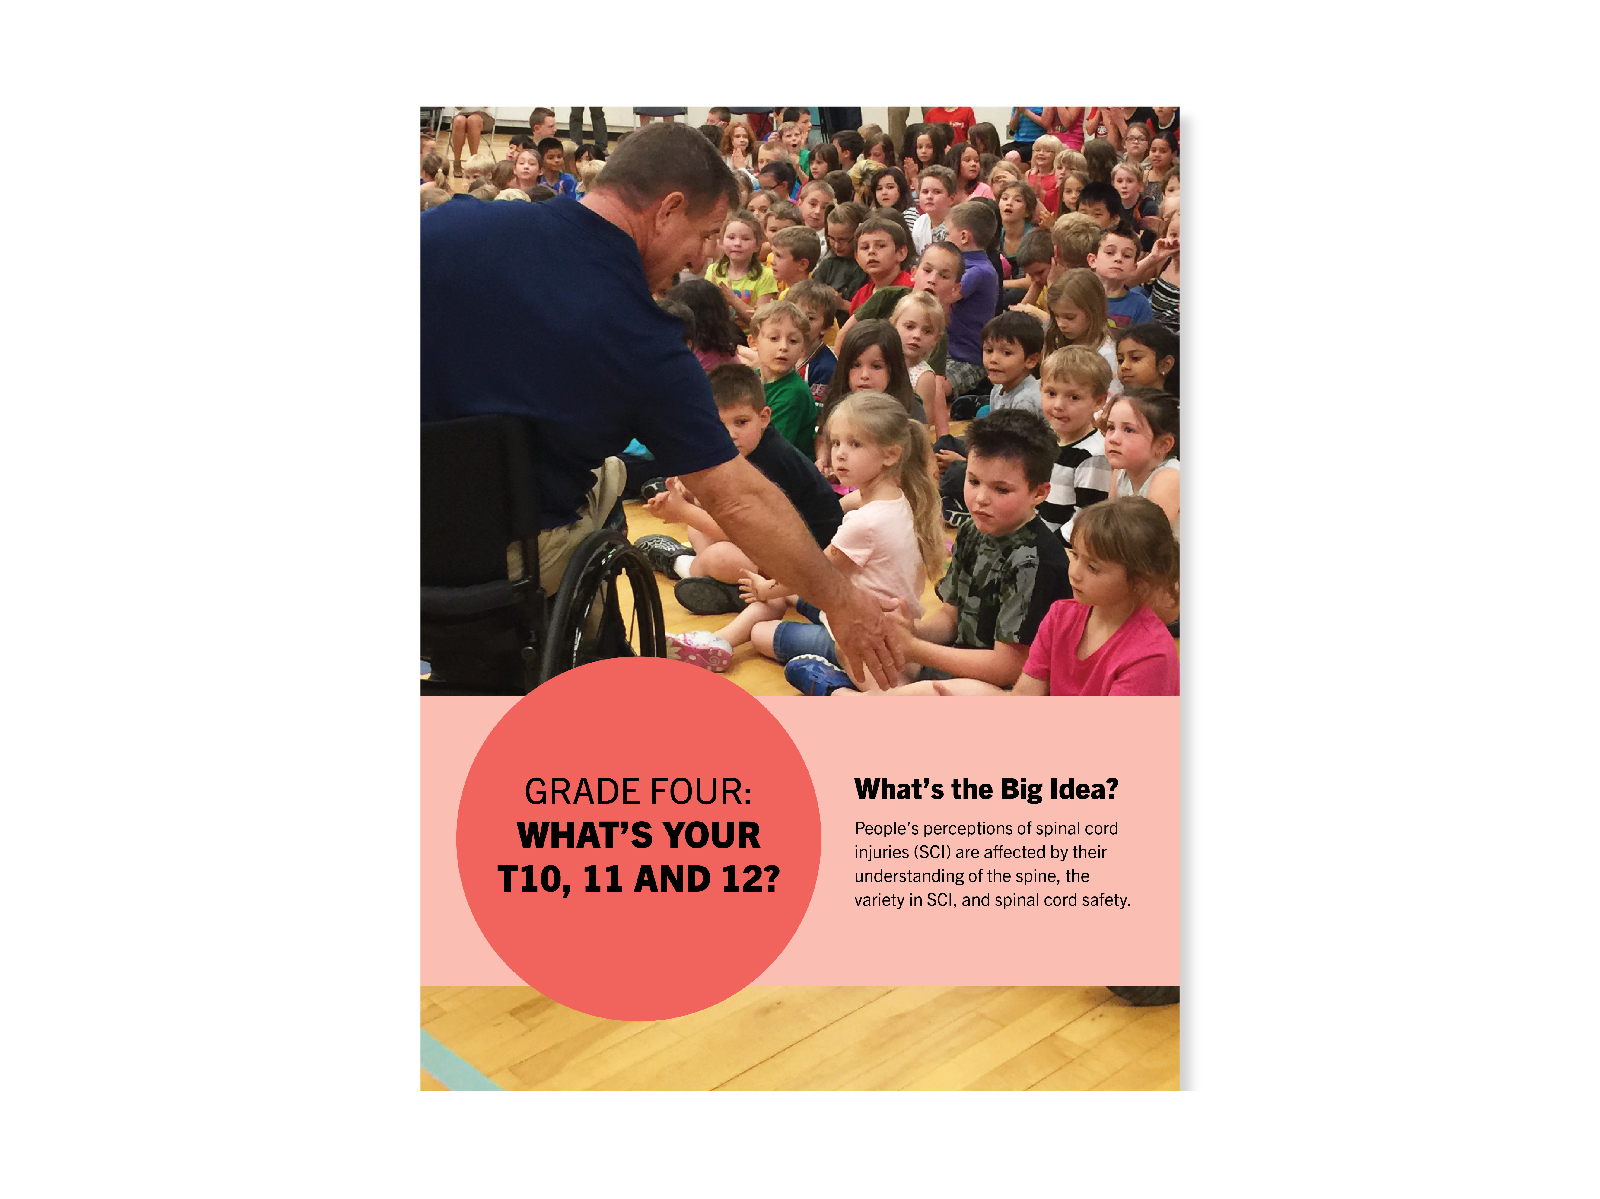 Rick Hansen at an elementary school assembly, greeting and extending his hand out to the first row of seated students. Cover for "What's your T10, 11, and 12?" lesson.